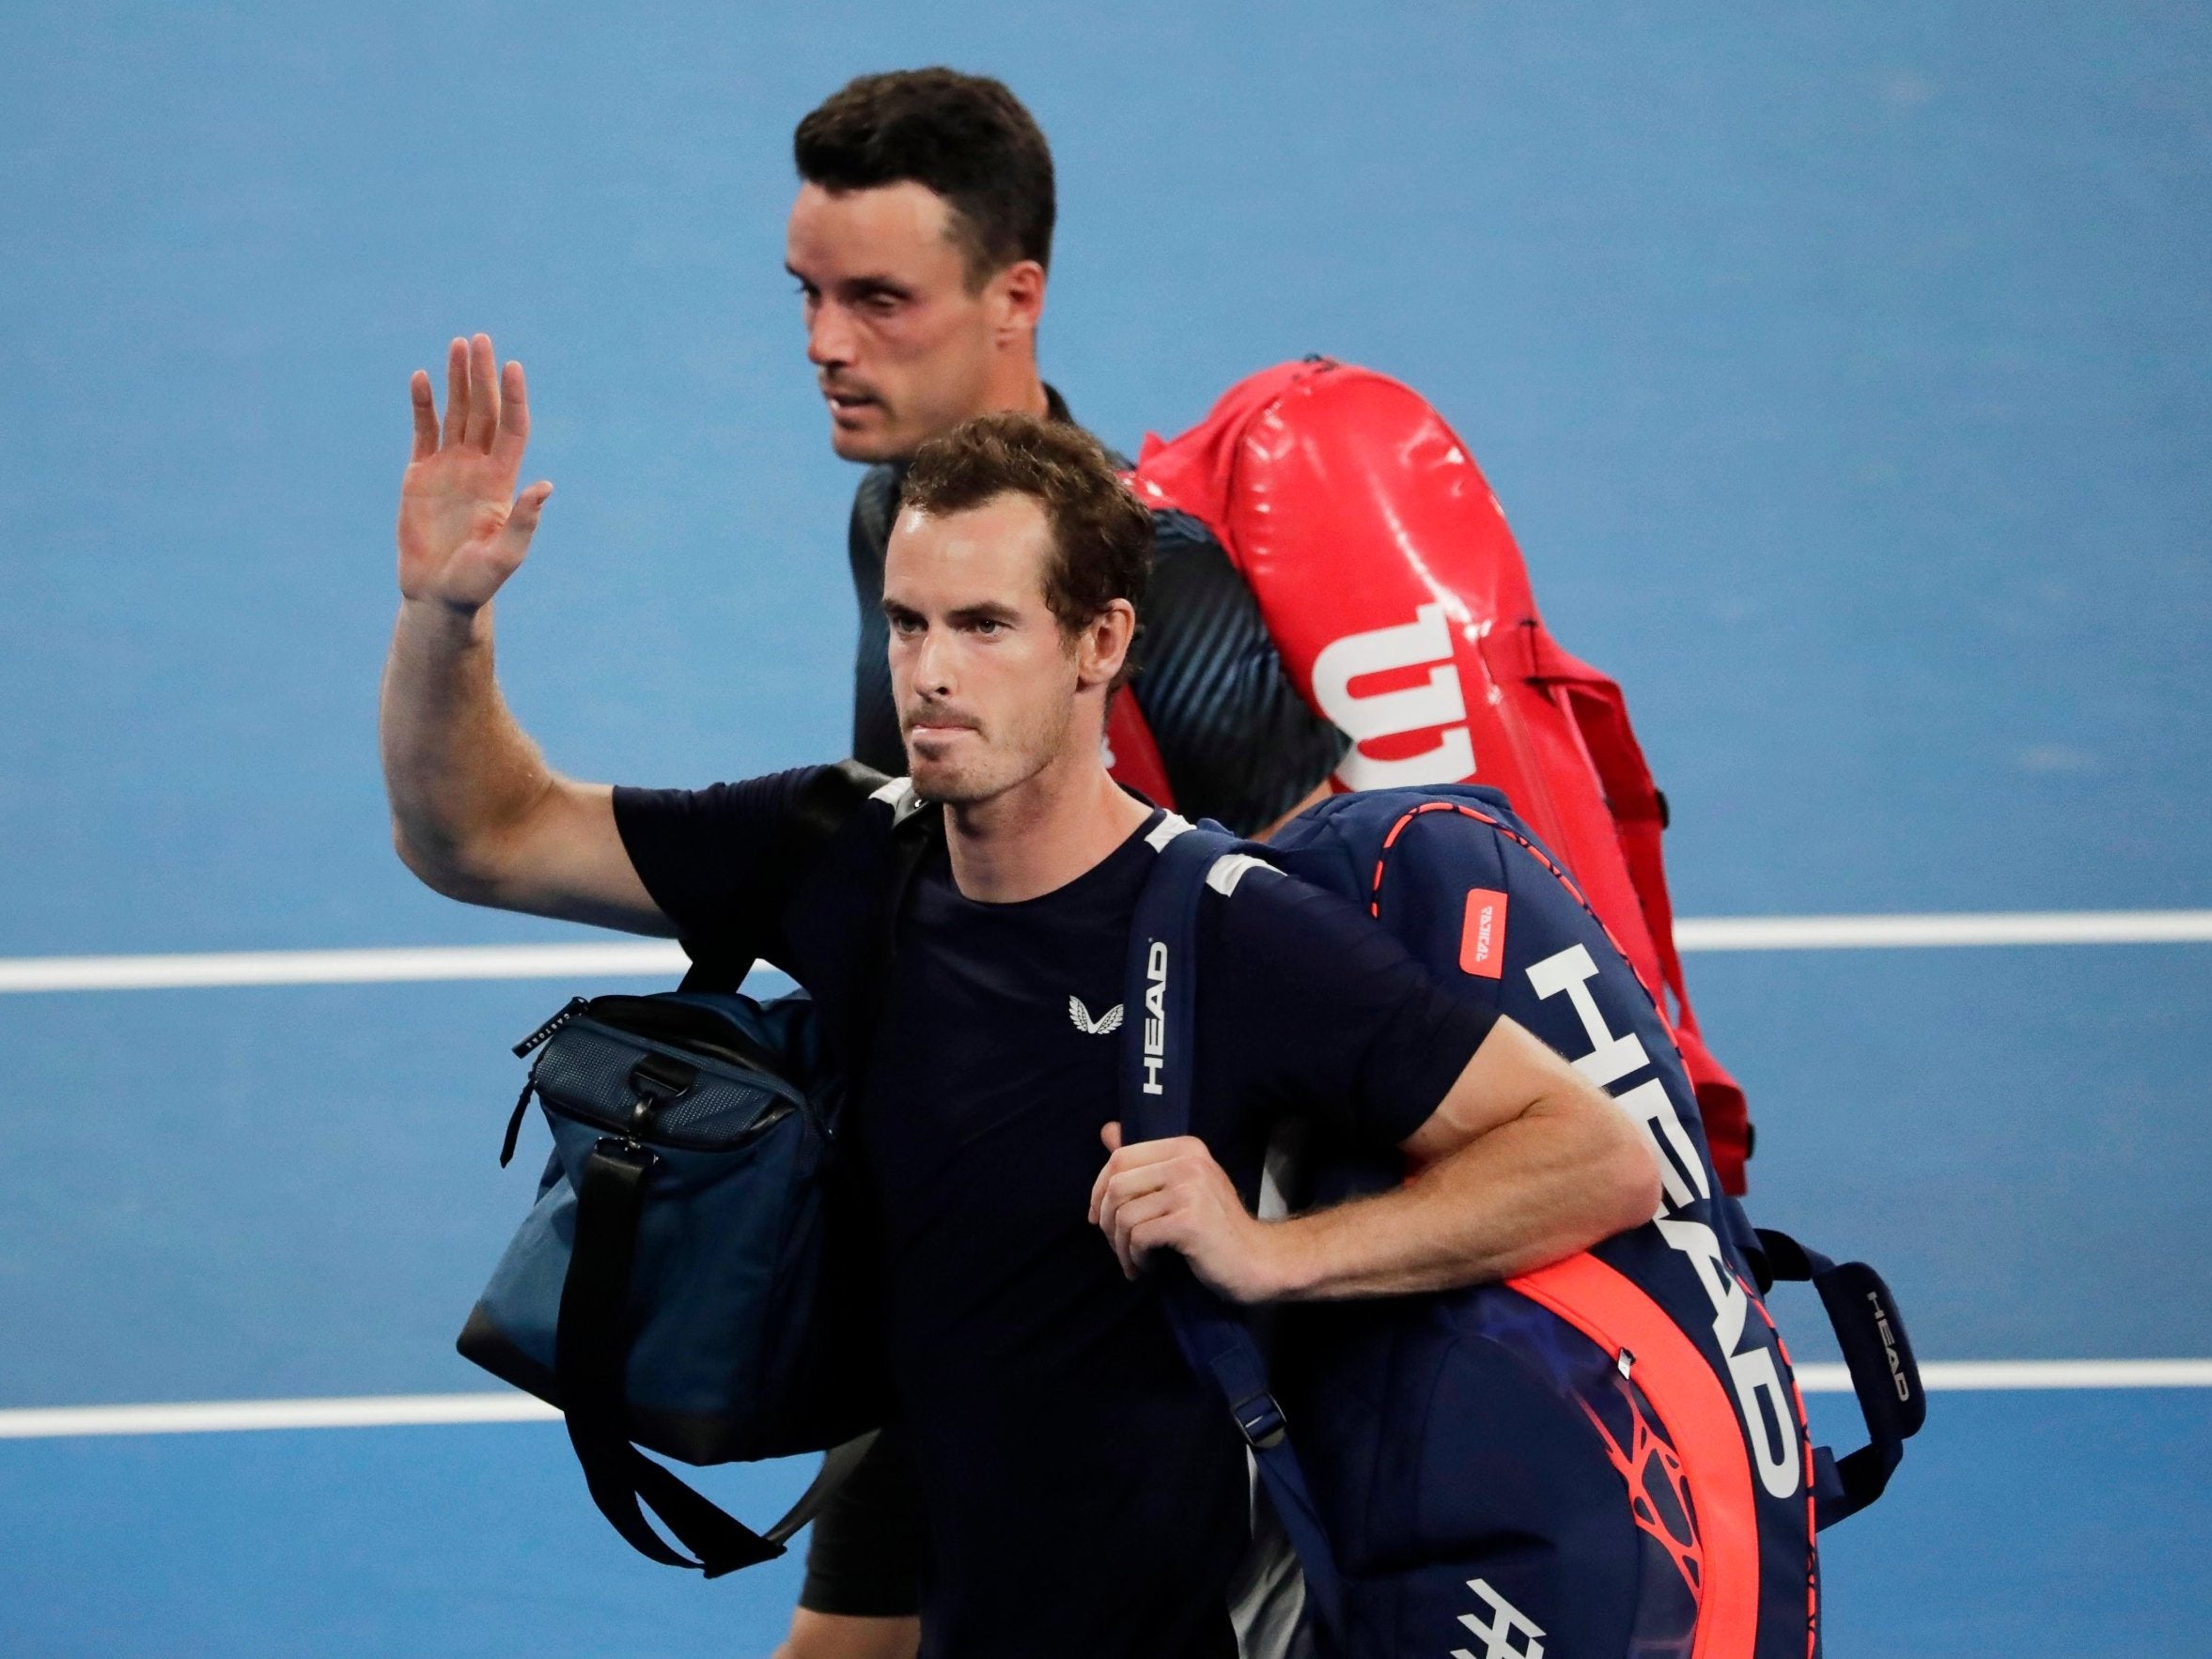 Murray appears to have said his final goodbye to Melbourne